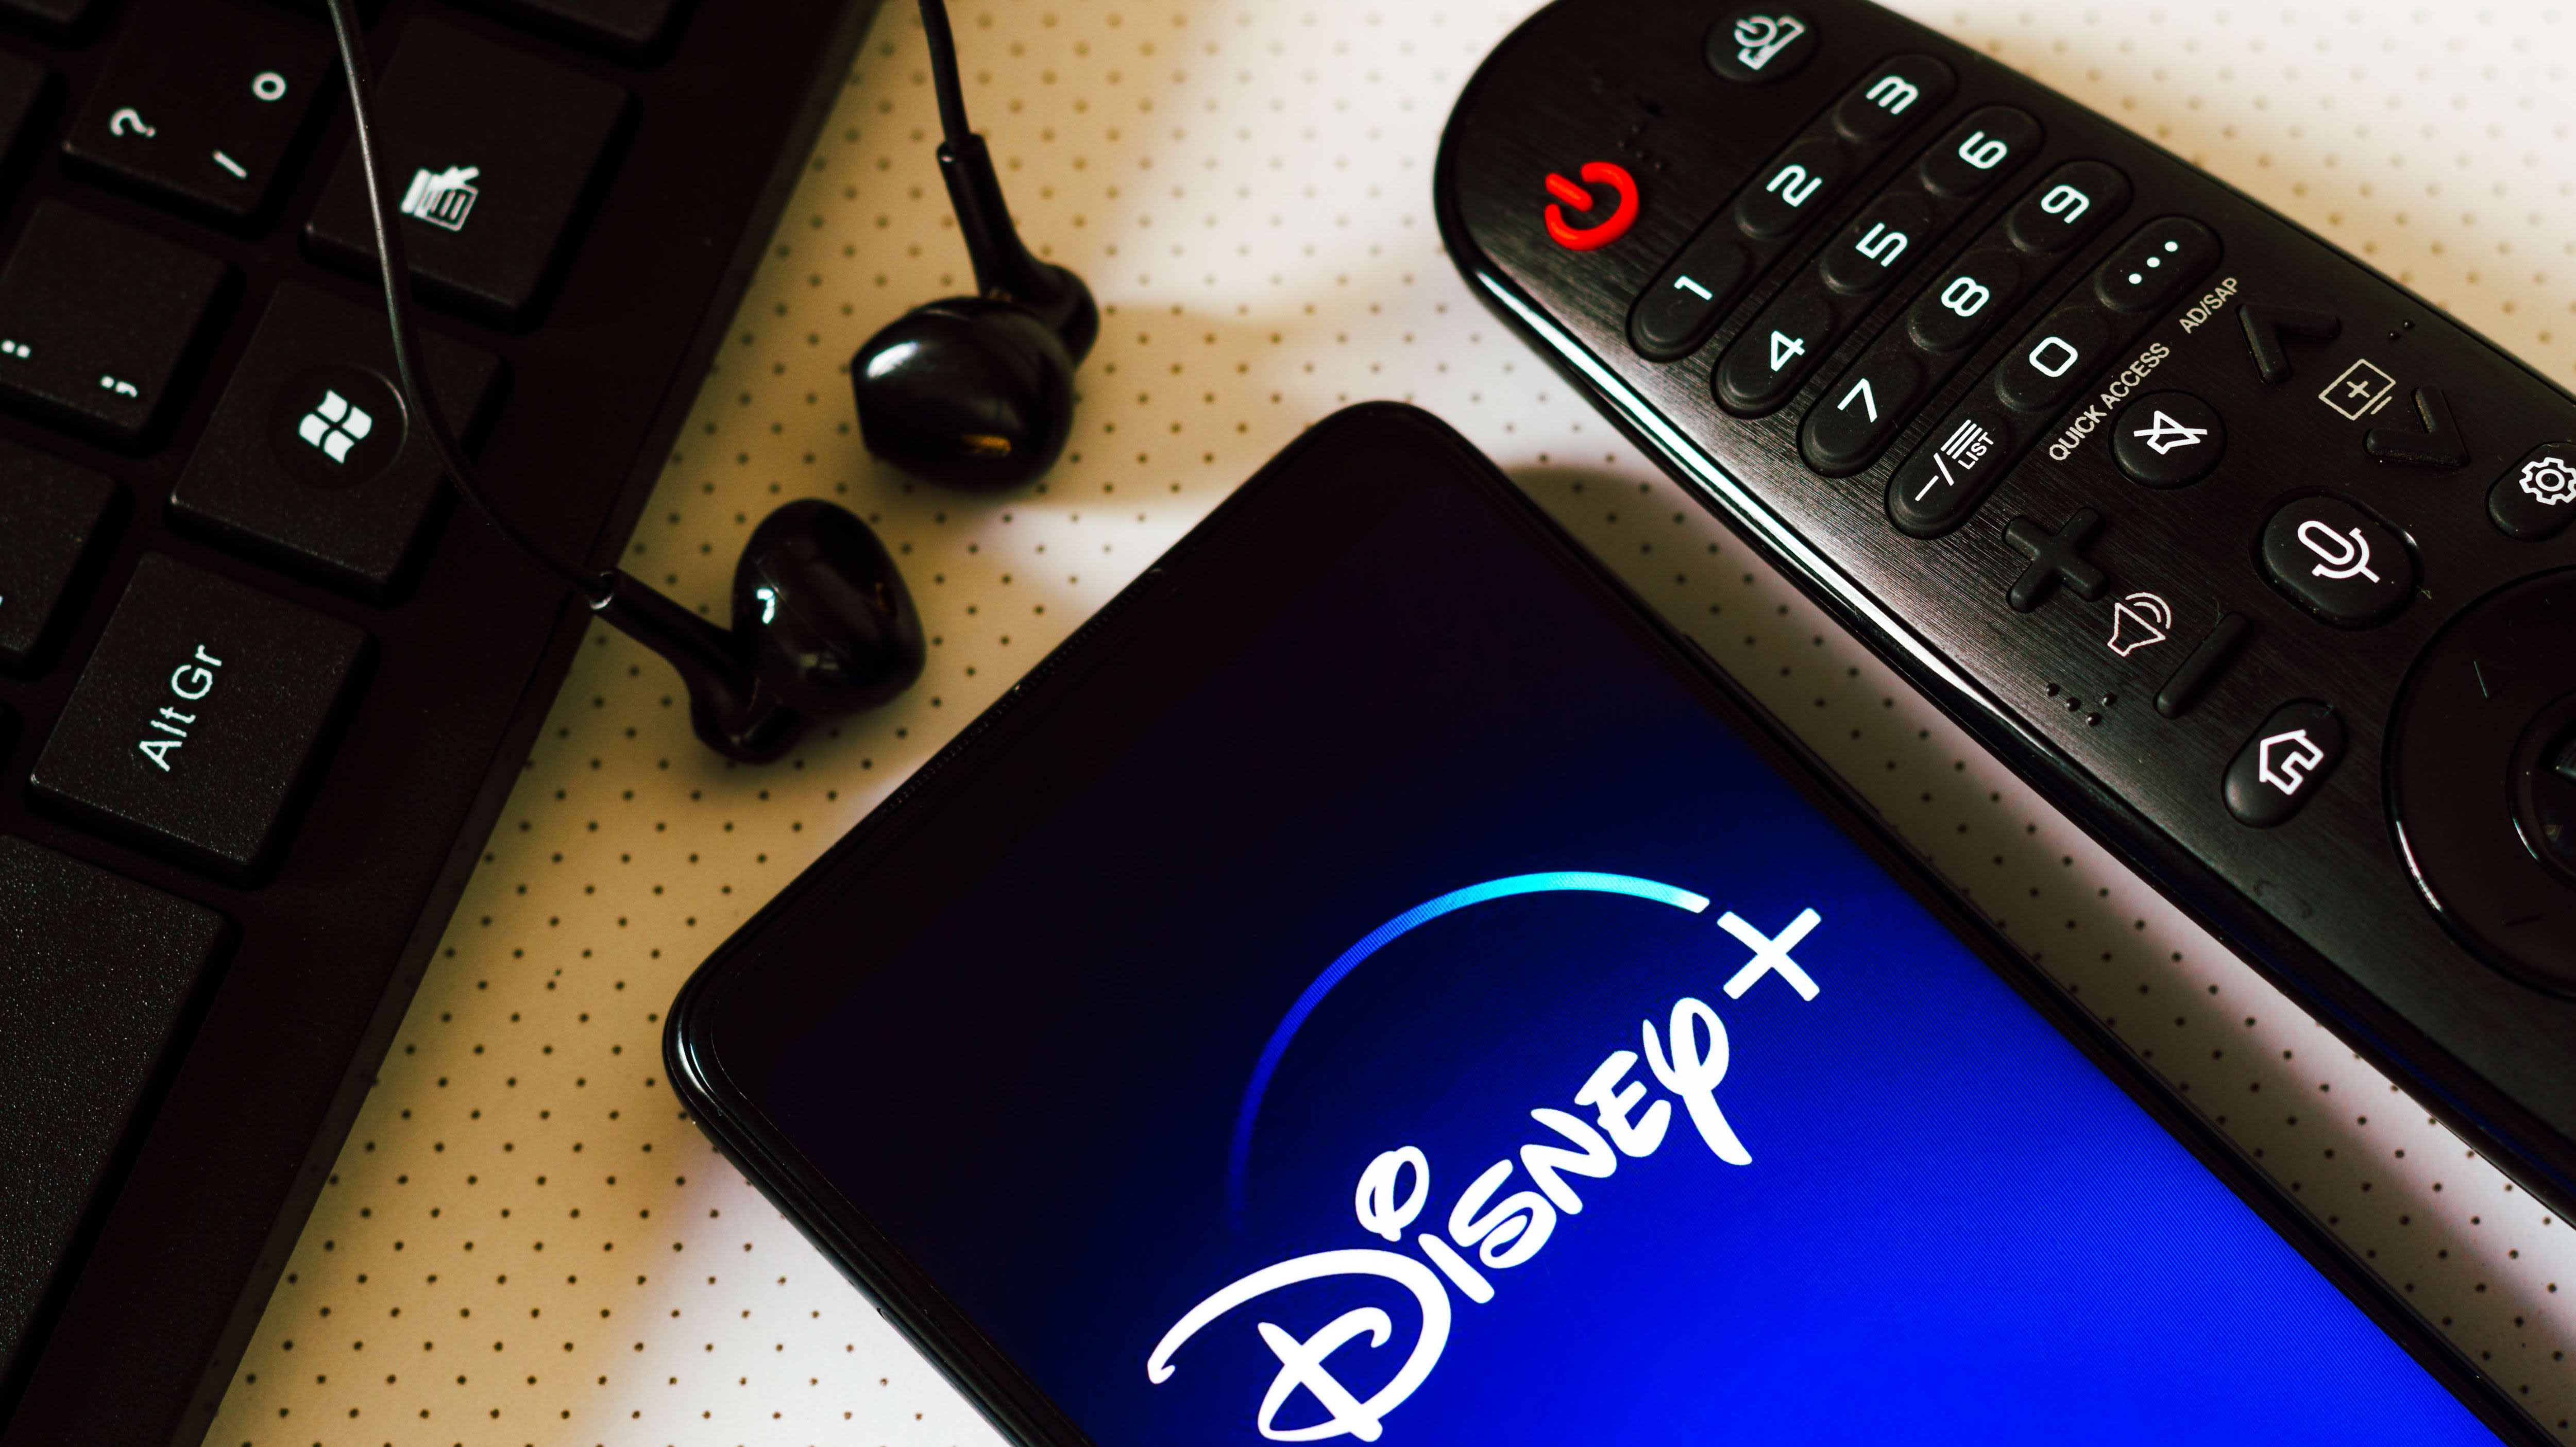 Disney, Apple and  keep waiting as NFL considers Sunday Ticket offers